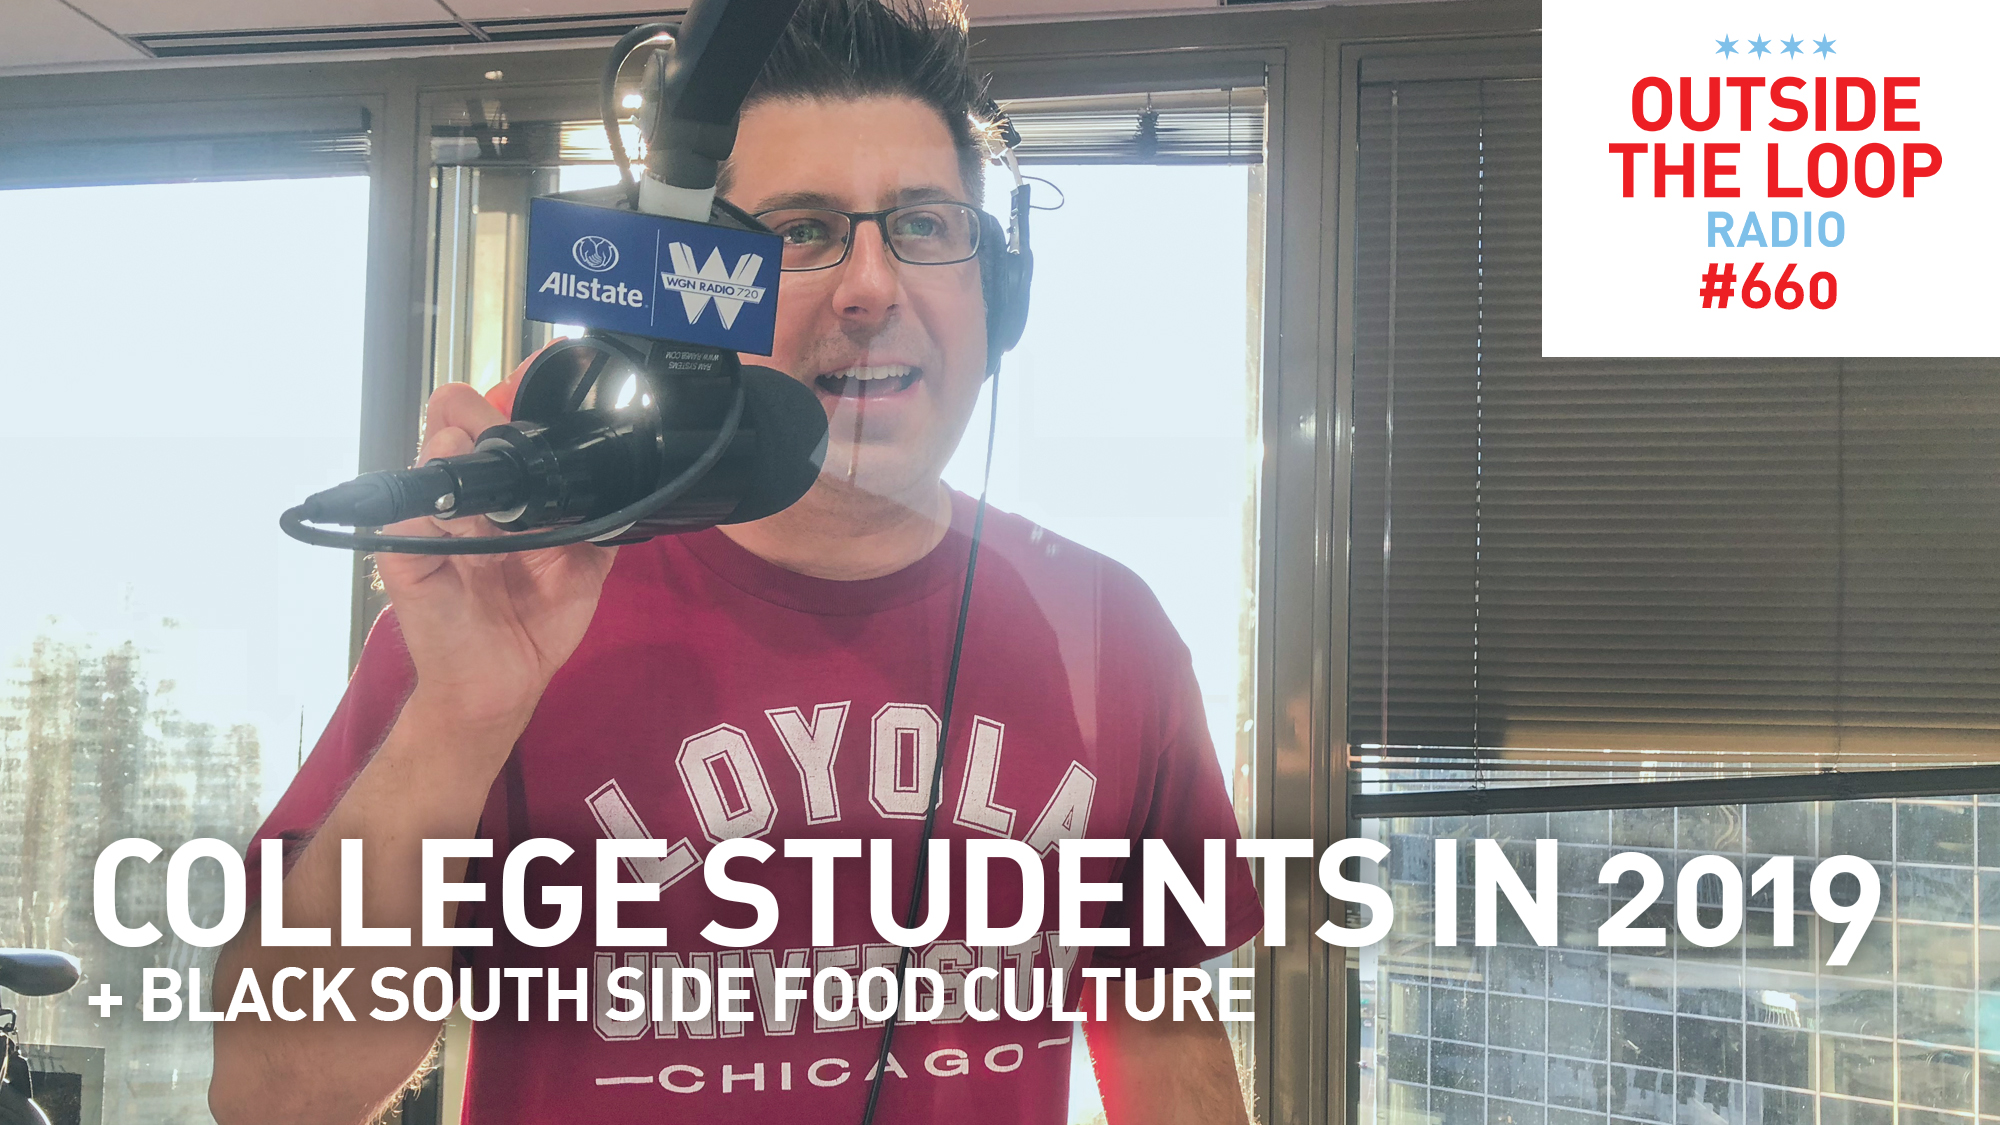 Mike Stephen discusses the state of college students in 2019 while representing his alma mater Loyola University Chicago.